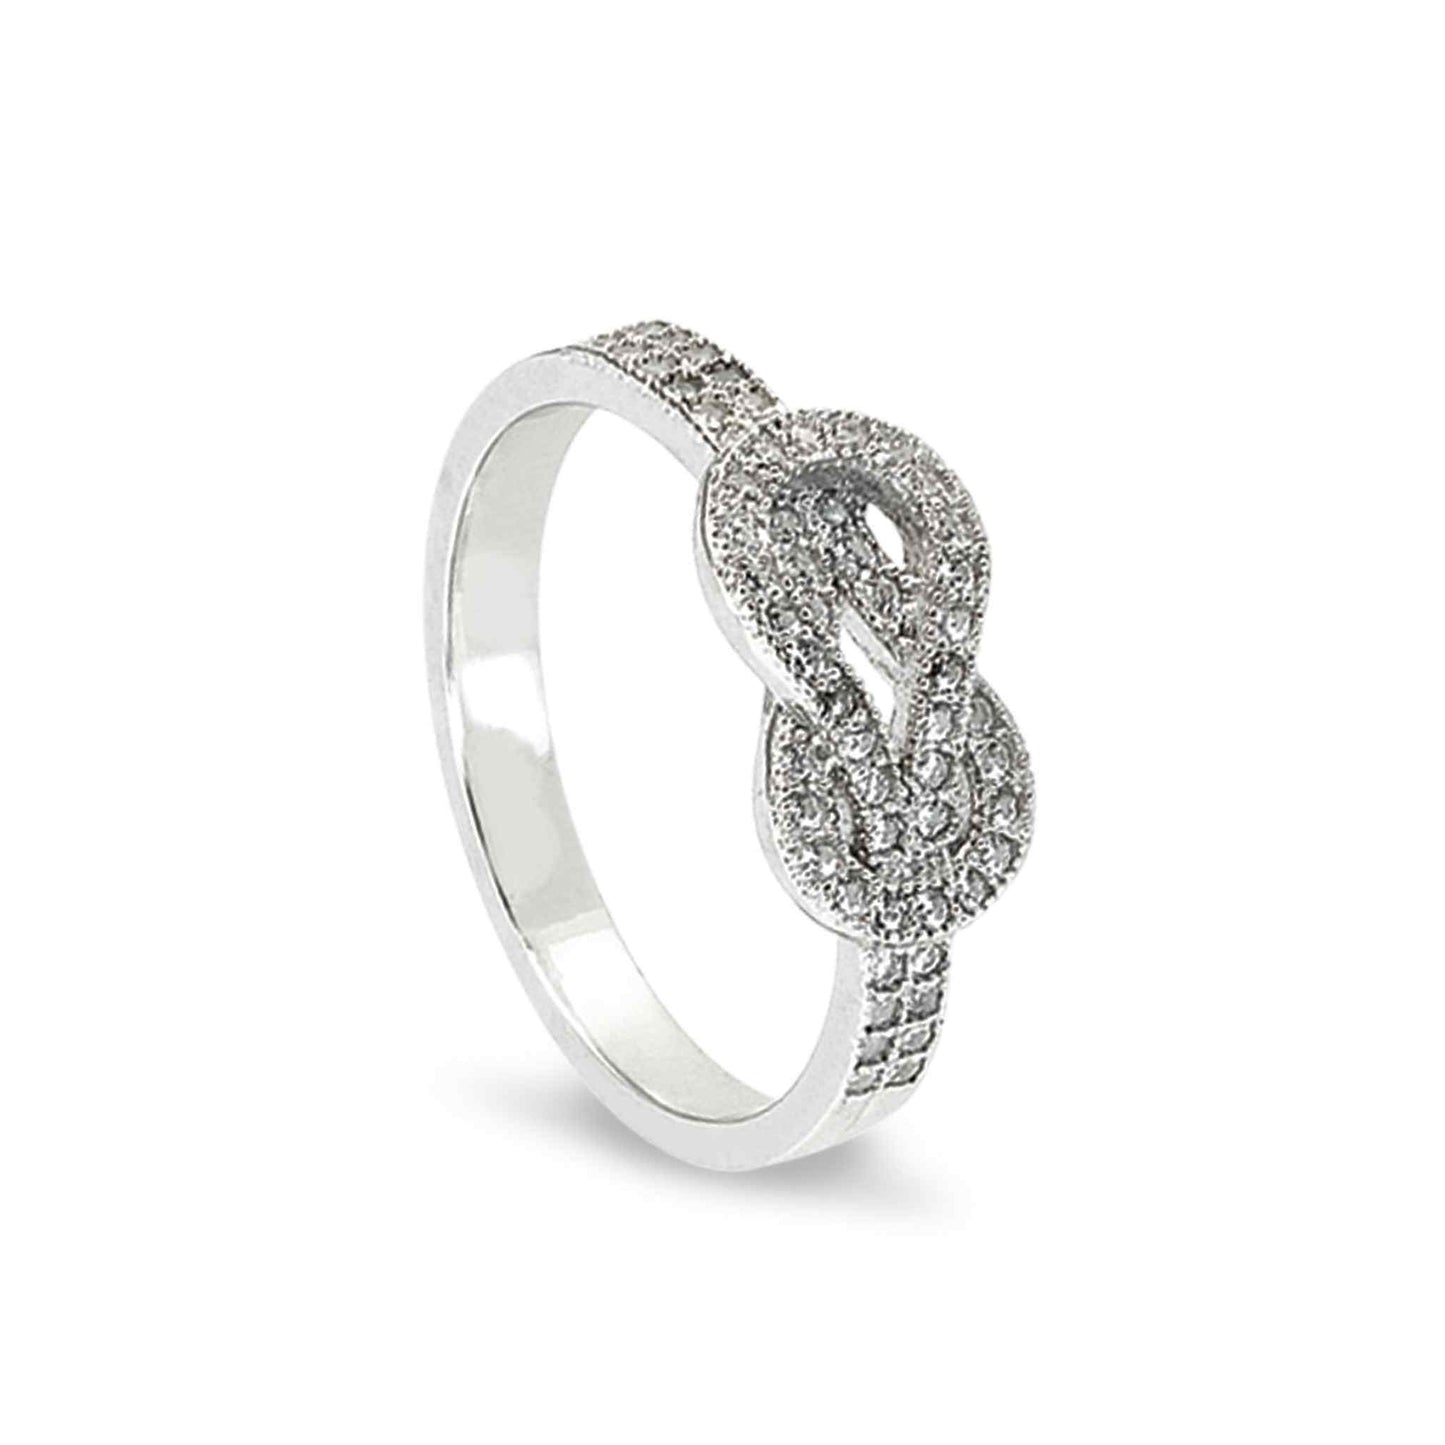 A knot ring with simulated diamonds displayed on a neutral white background.